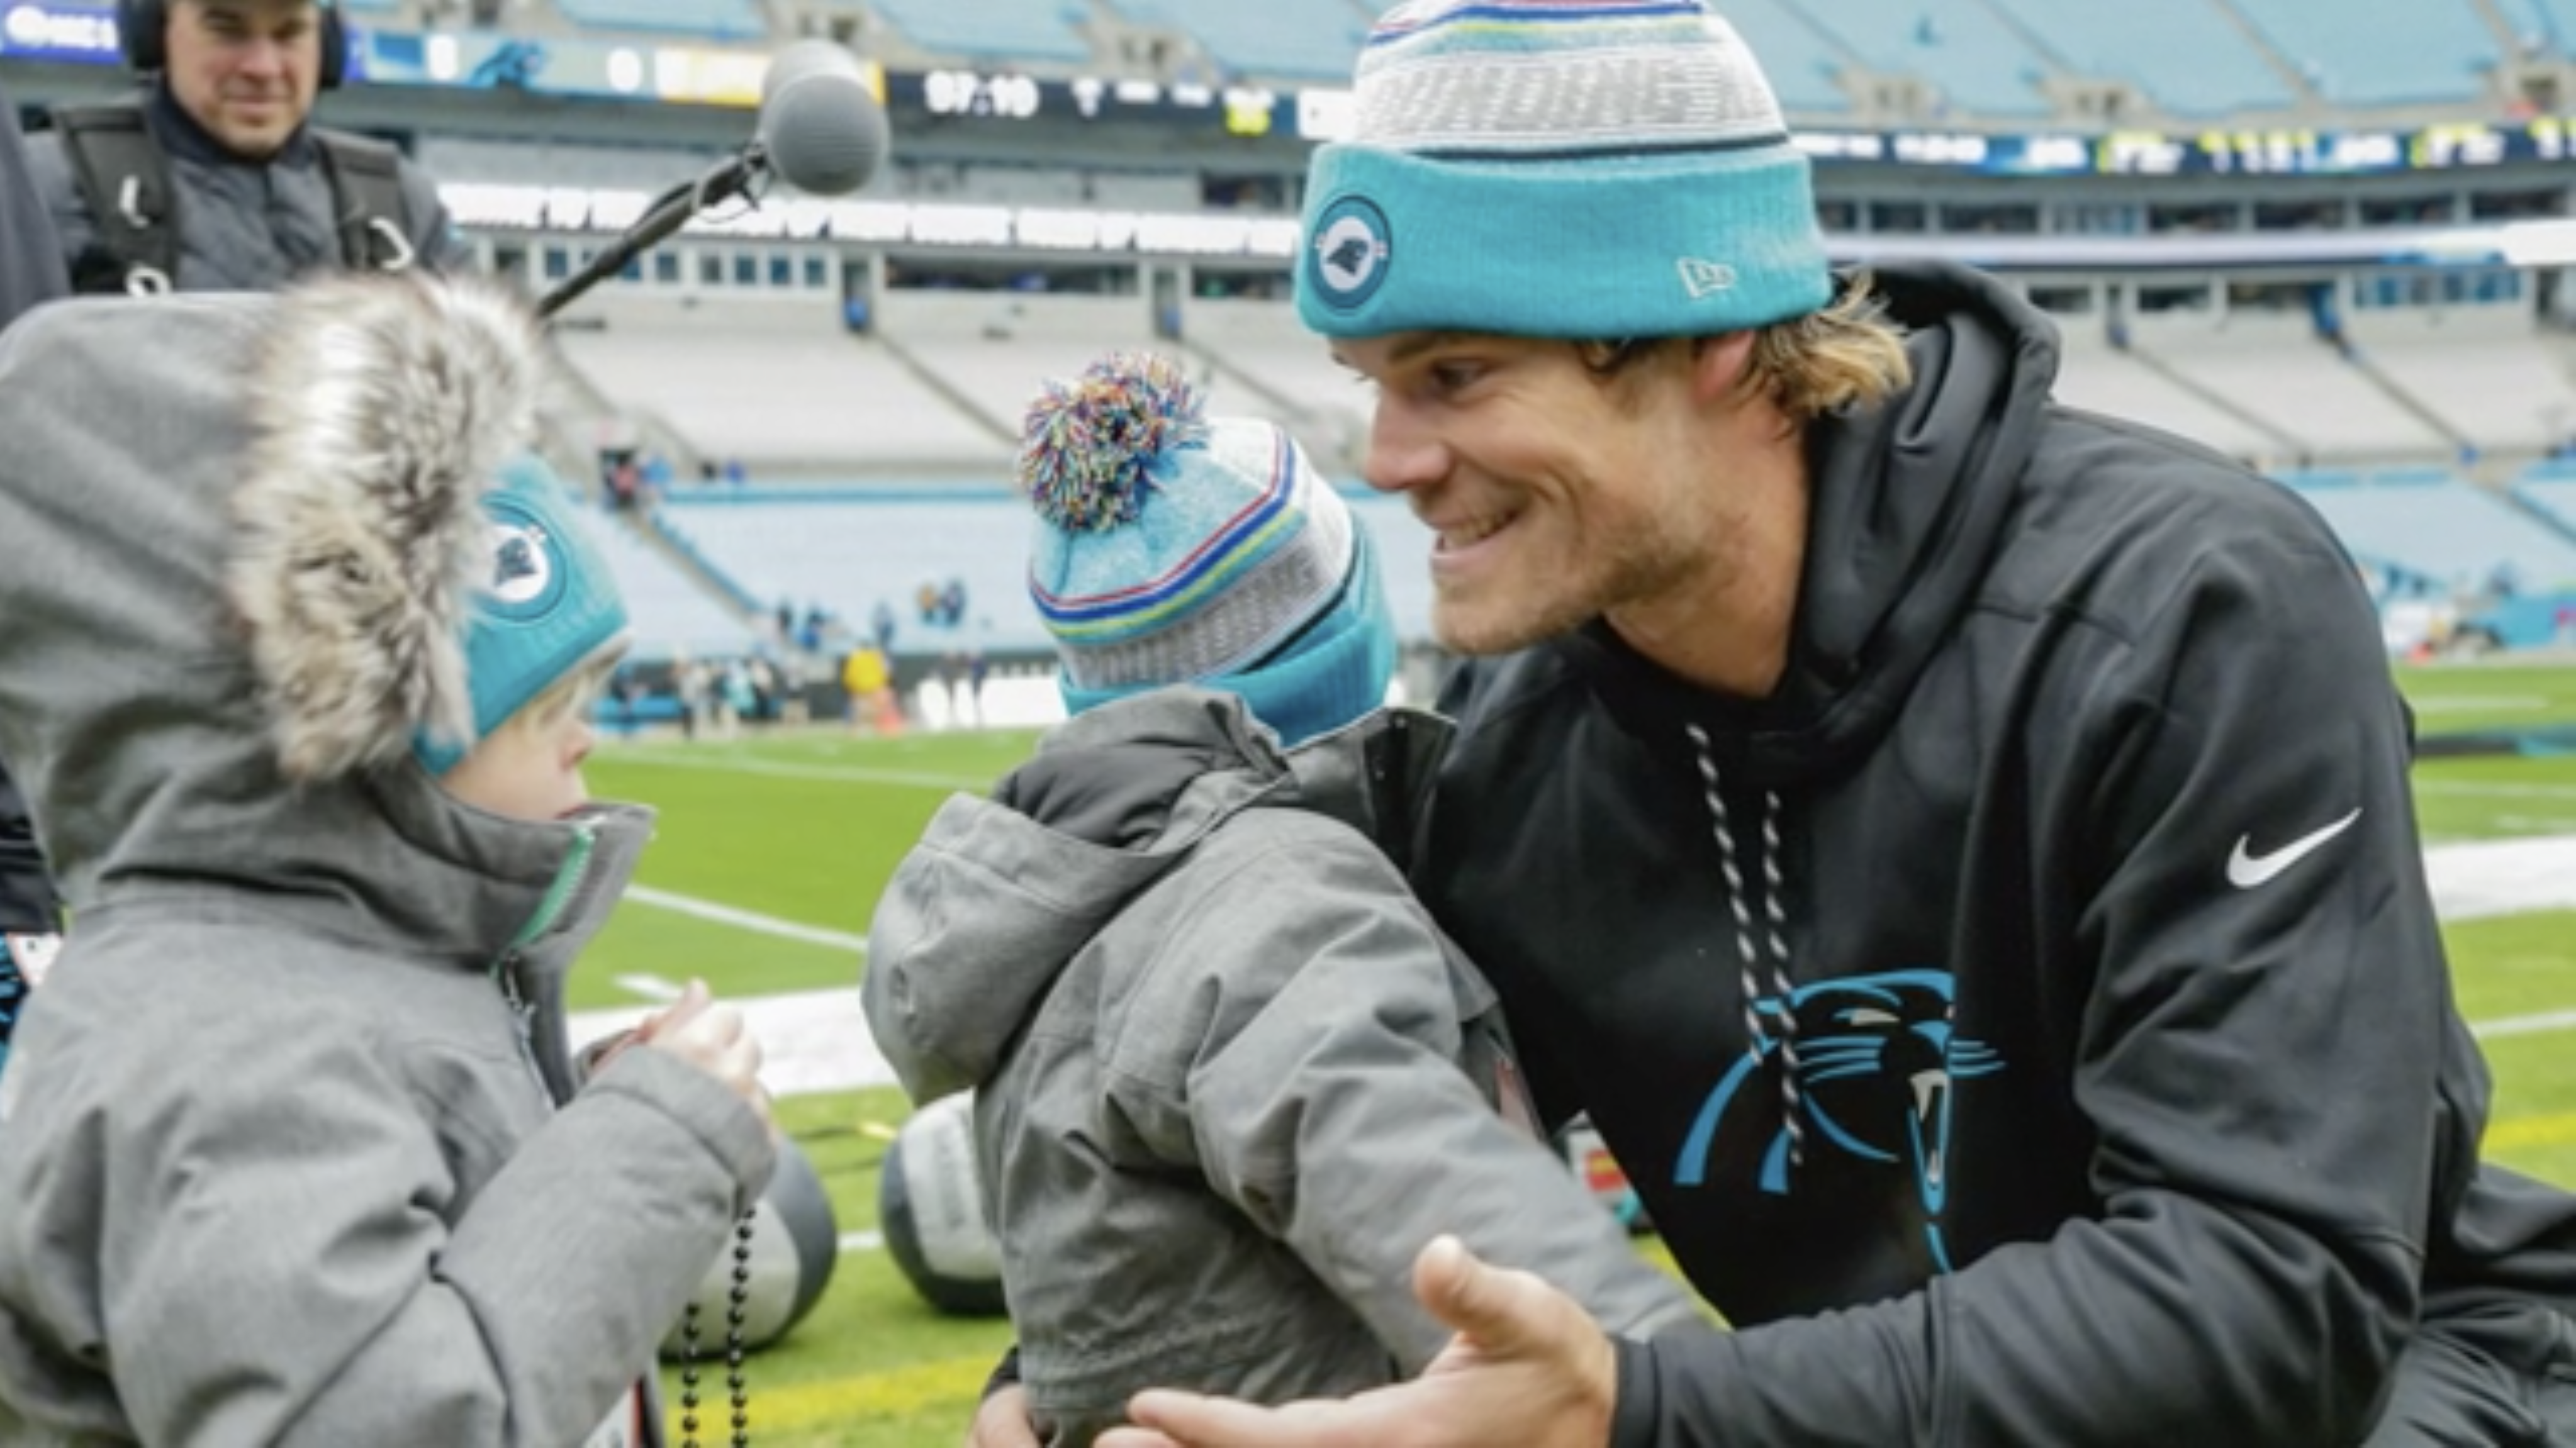 A mom on why Greg Olsen should be NFL Man of Year: He ‘kept our daughter alive’